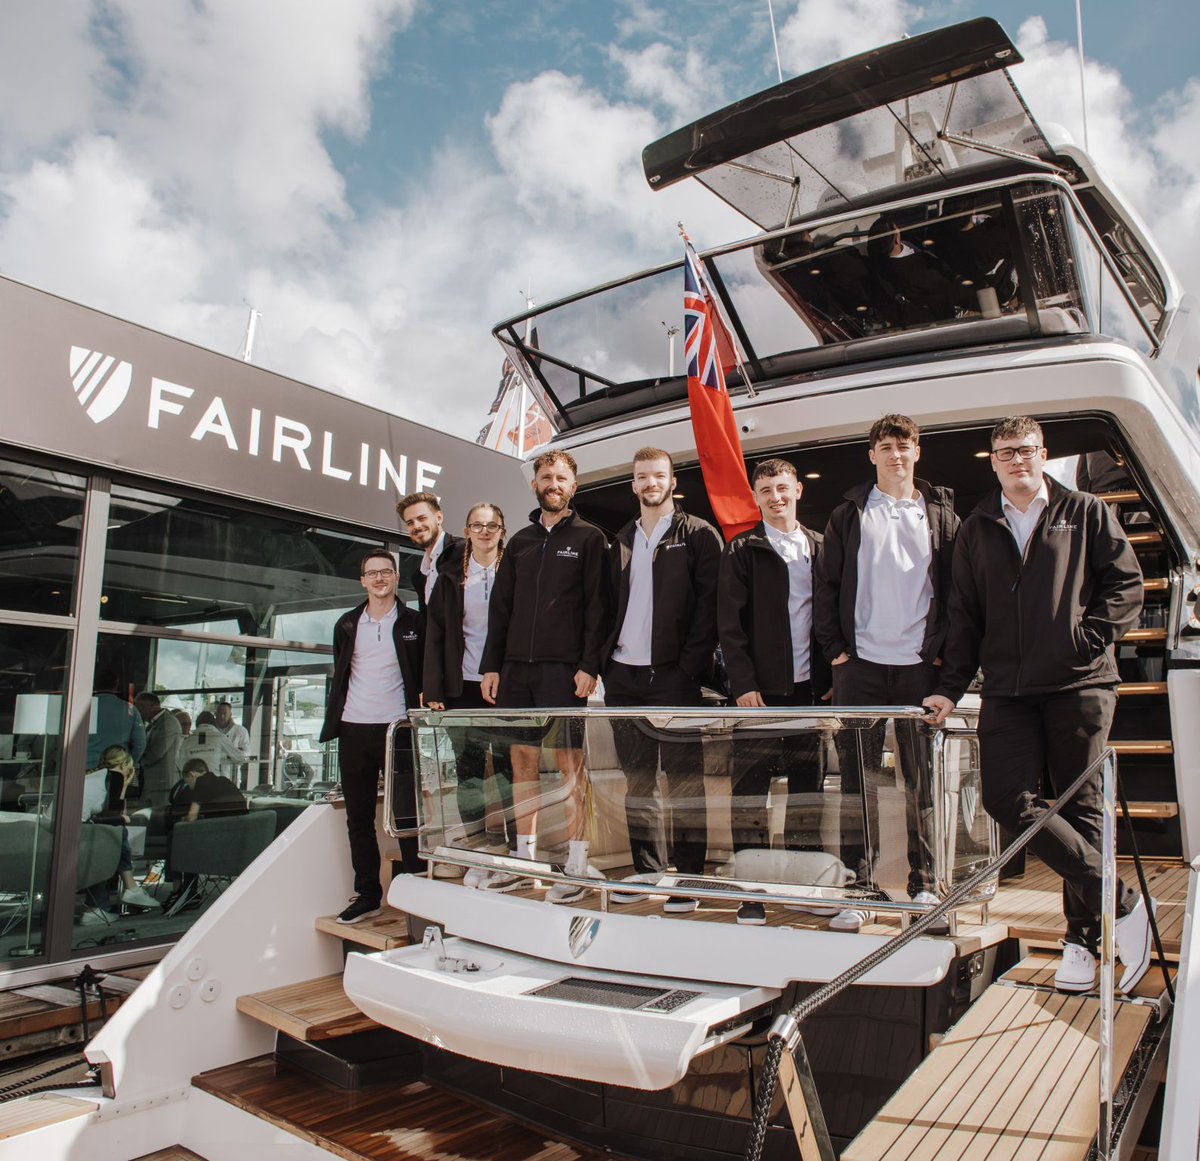 Great to see #FairlineYachts at #Oundle #Peterborough is riding the crest of a wave despite the challenging conditions as it announces it's recruiting 100 plus staff as its order book grows. @OP_Peterborough peterboroughtoday.co.uk/business/boat-…